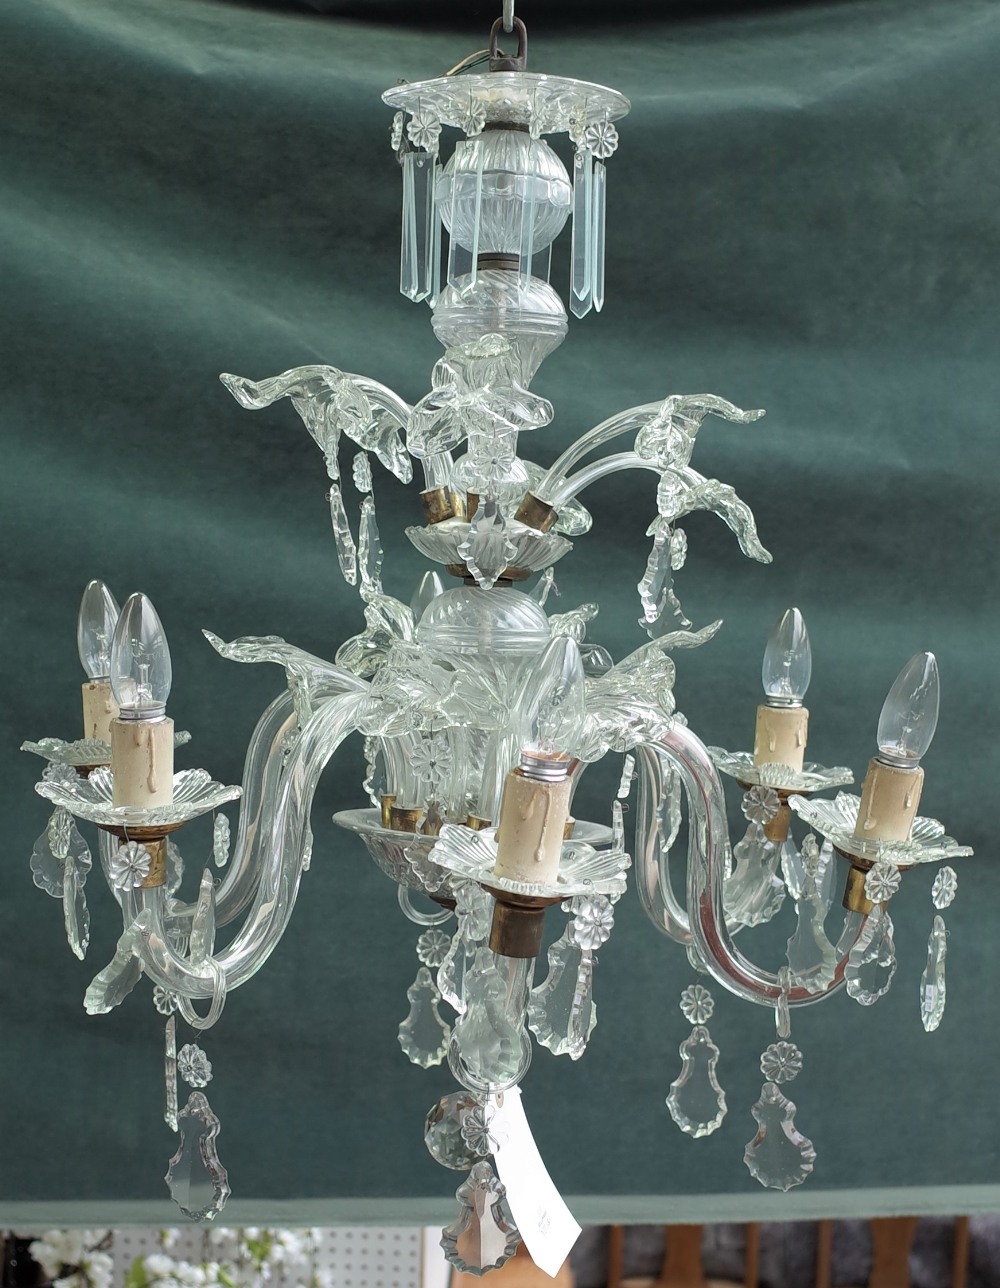 A 20th century Italian style glass six light chandelier with spiral column and moulded branches - Image 2 of 3